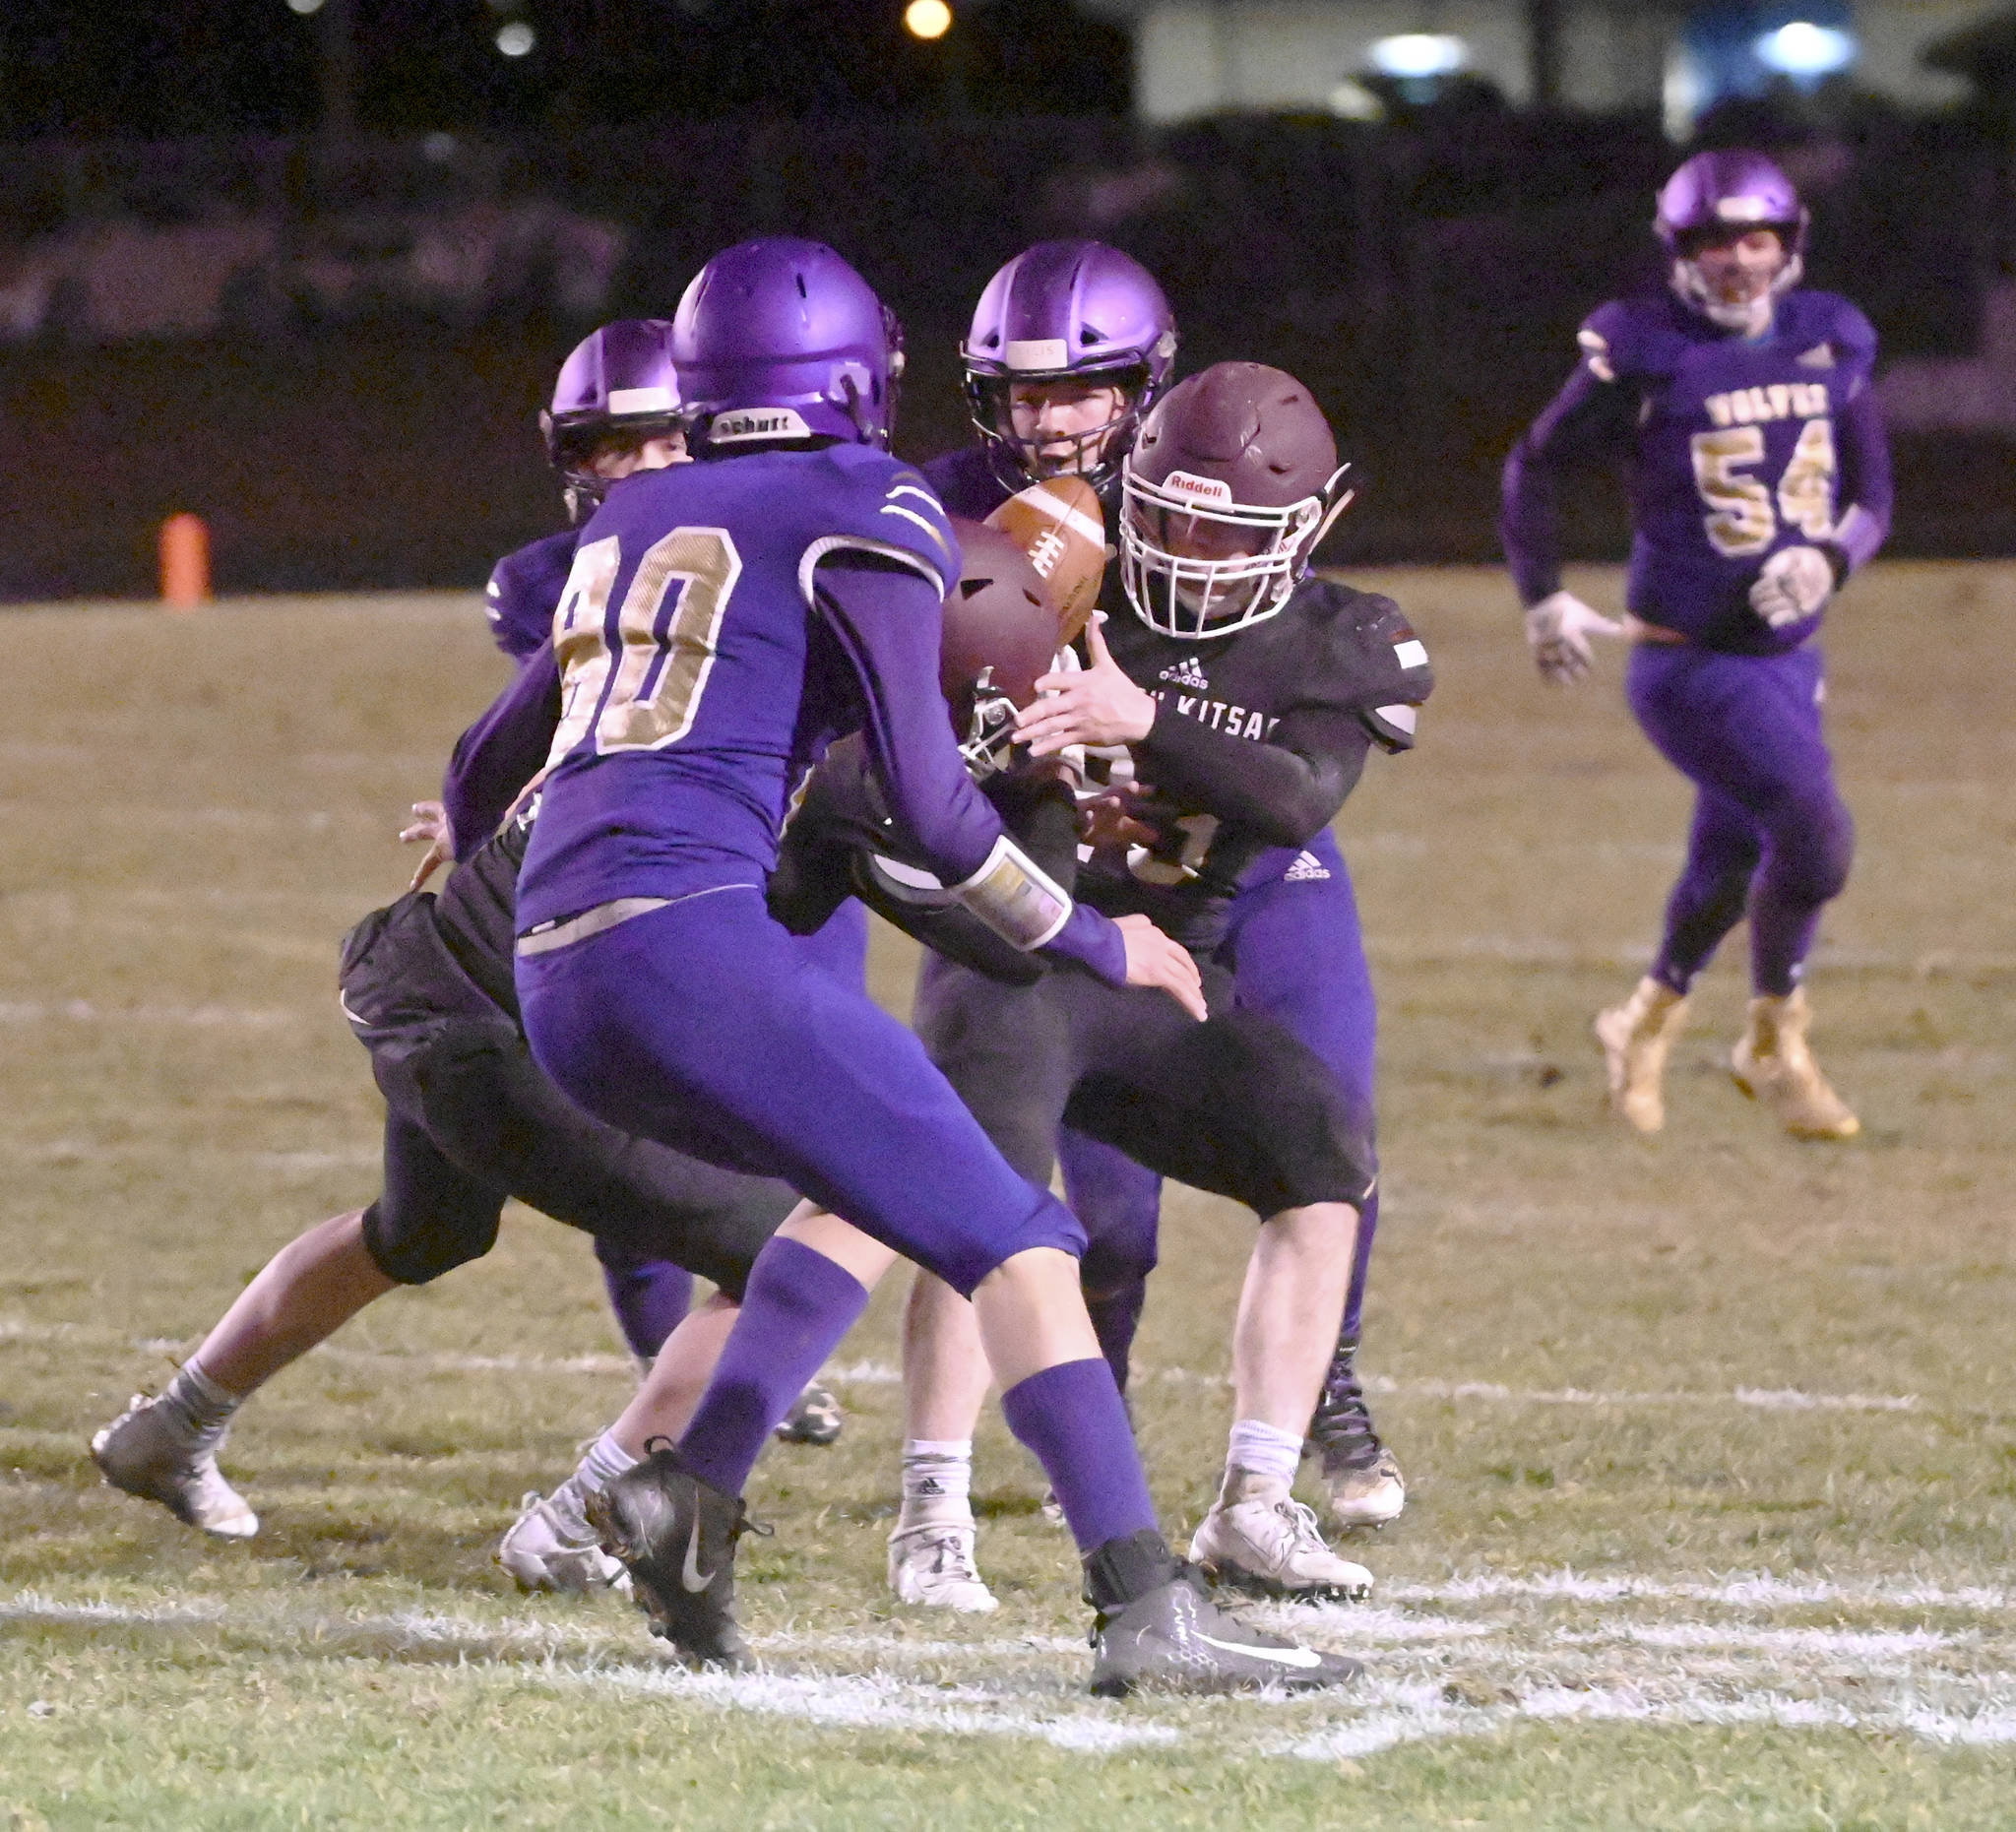 South Kitsap receiver Brayden Segerman tries to get his hands on a pass while surrounded by Sequim defenders. (Michael Dashiell/Sequim Gazette)